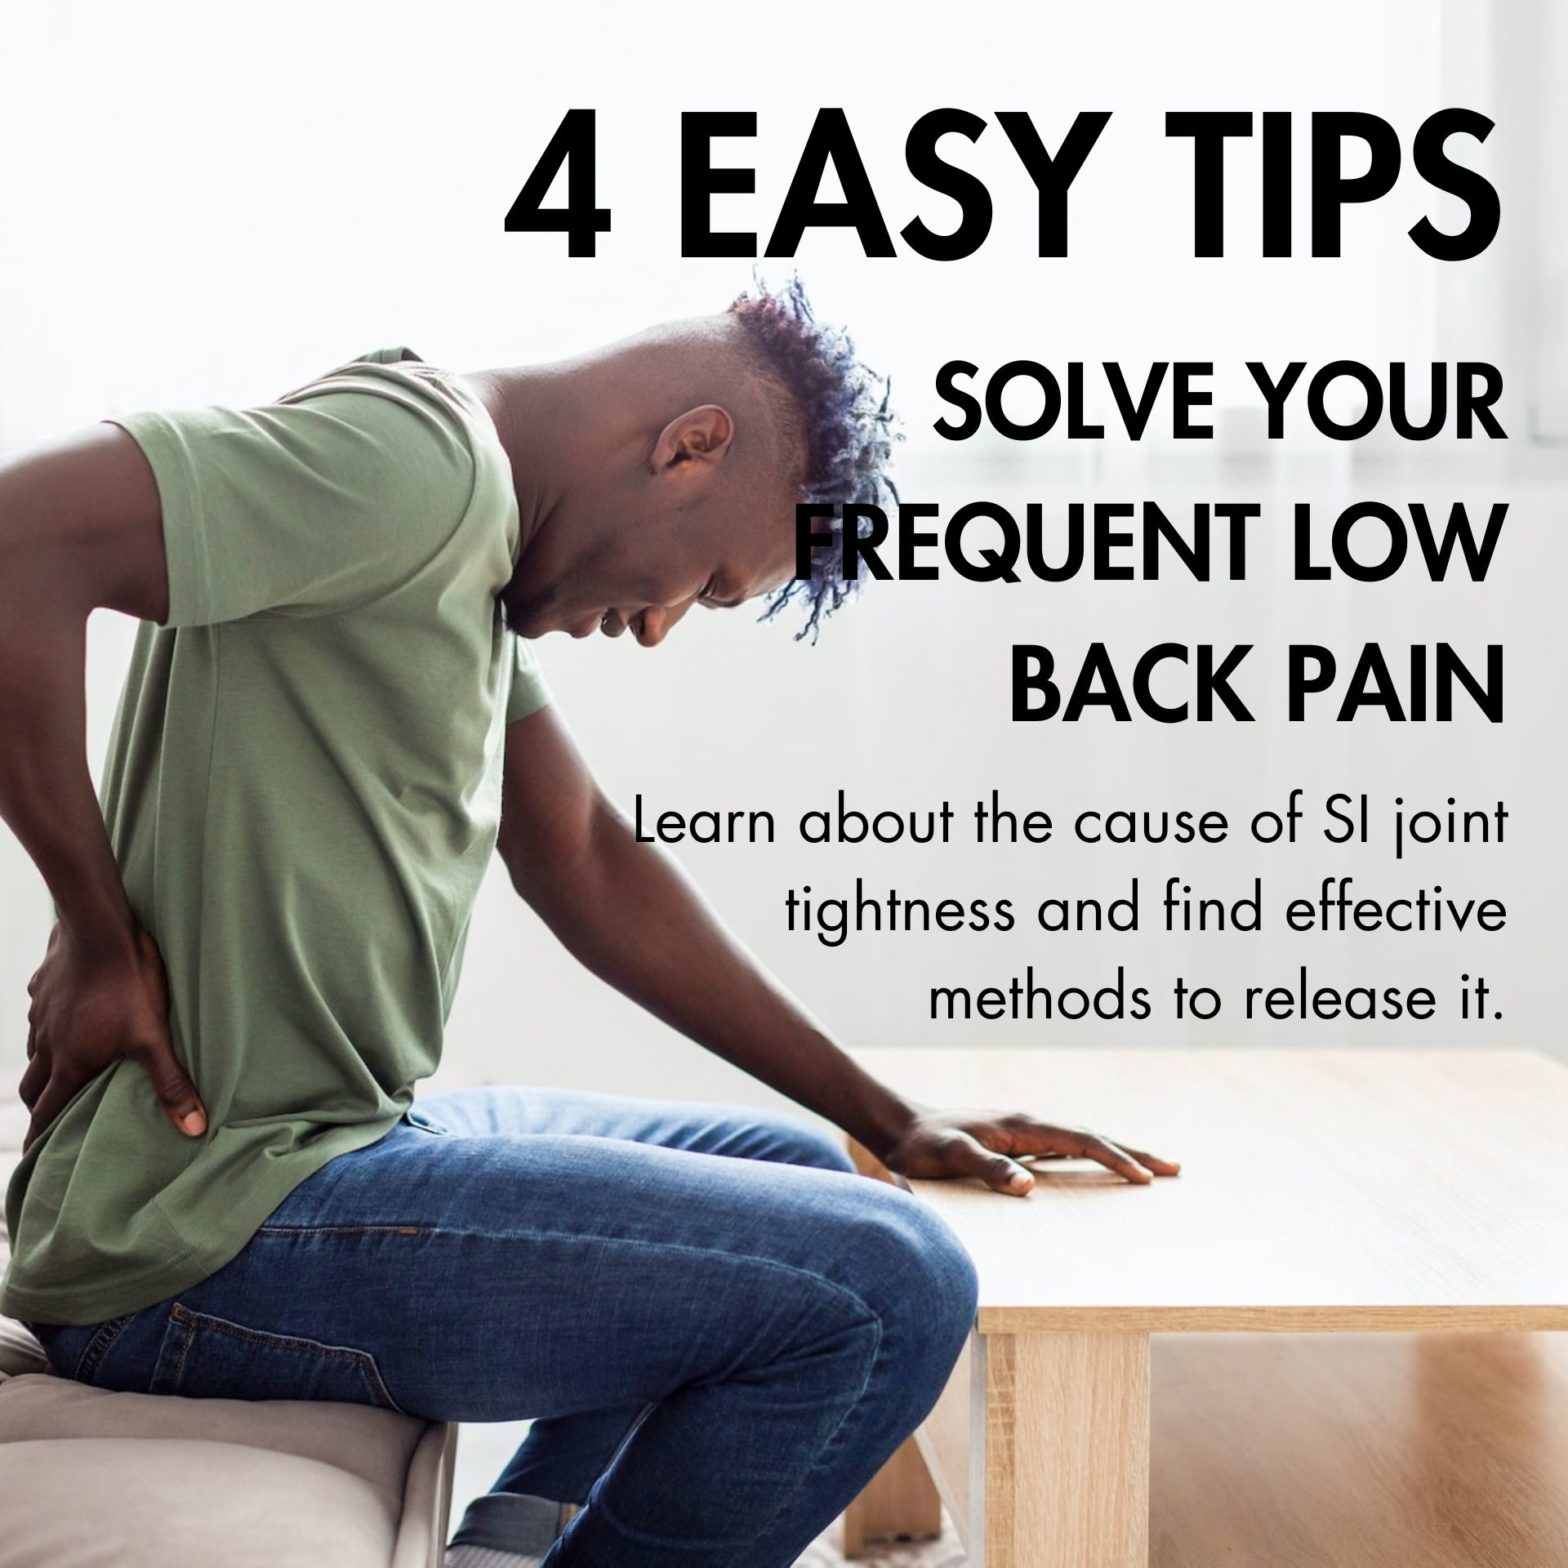 4 Easy Tips to solve your frequent low back pain